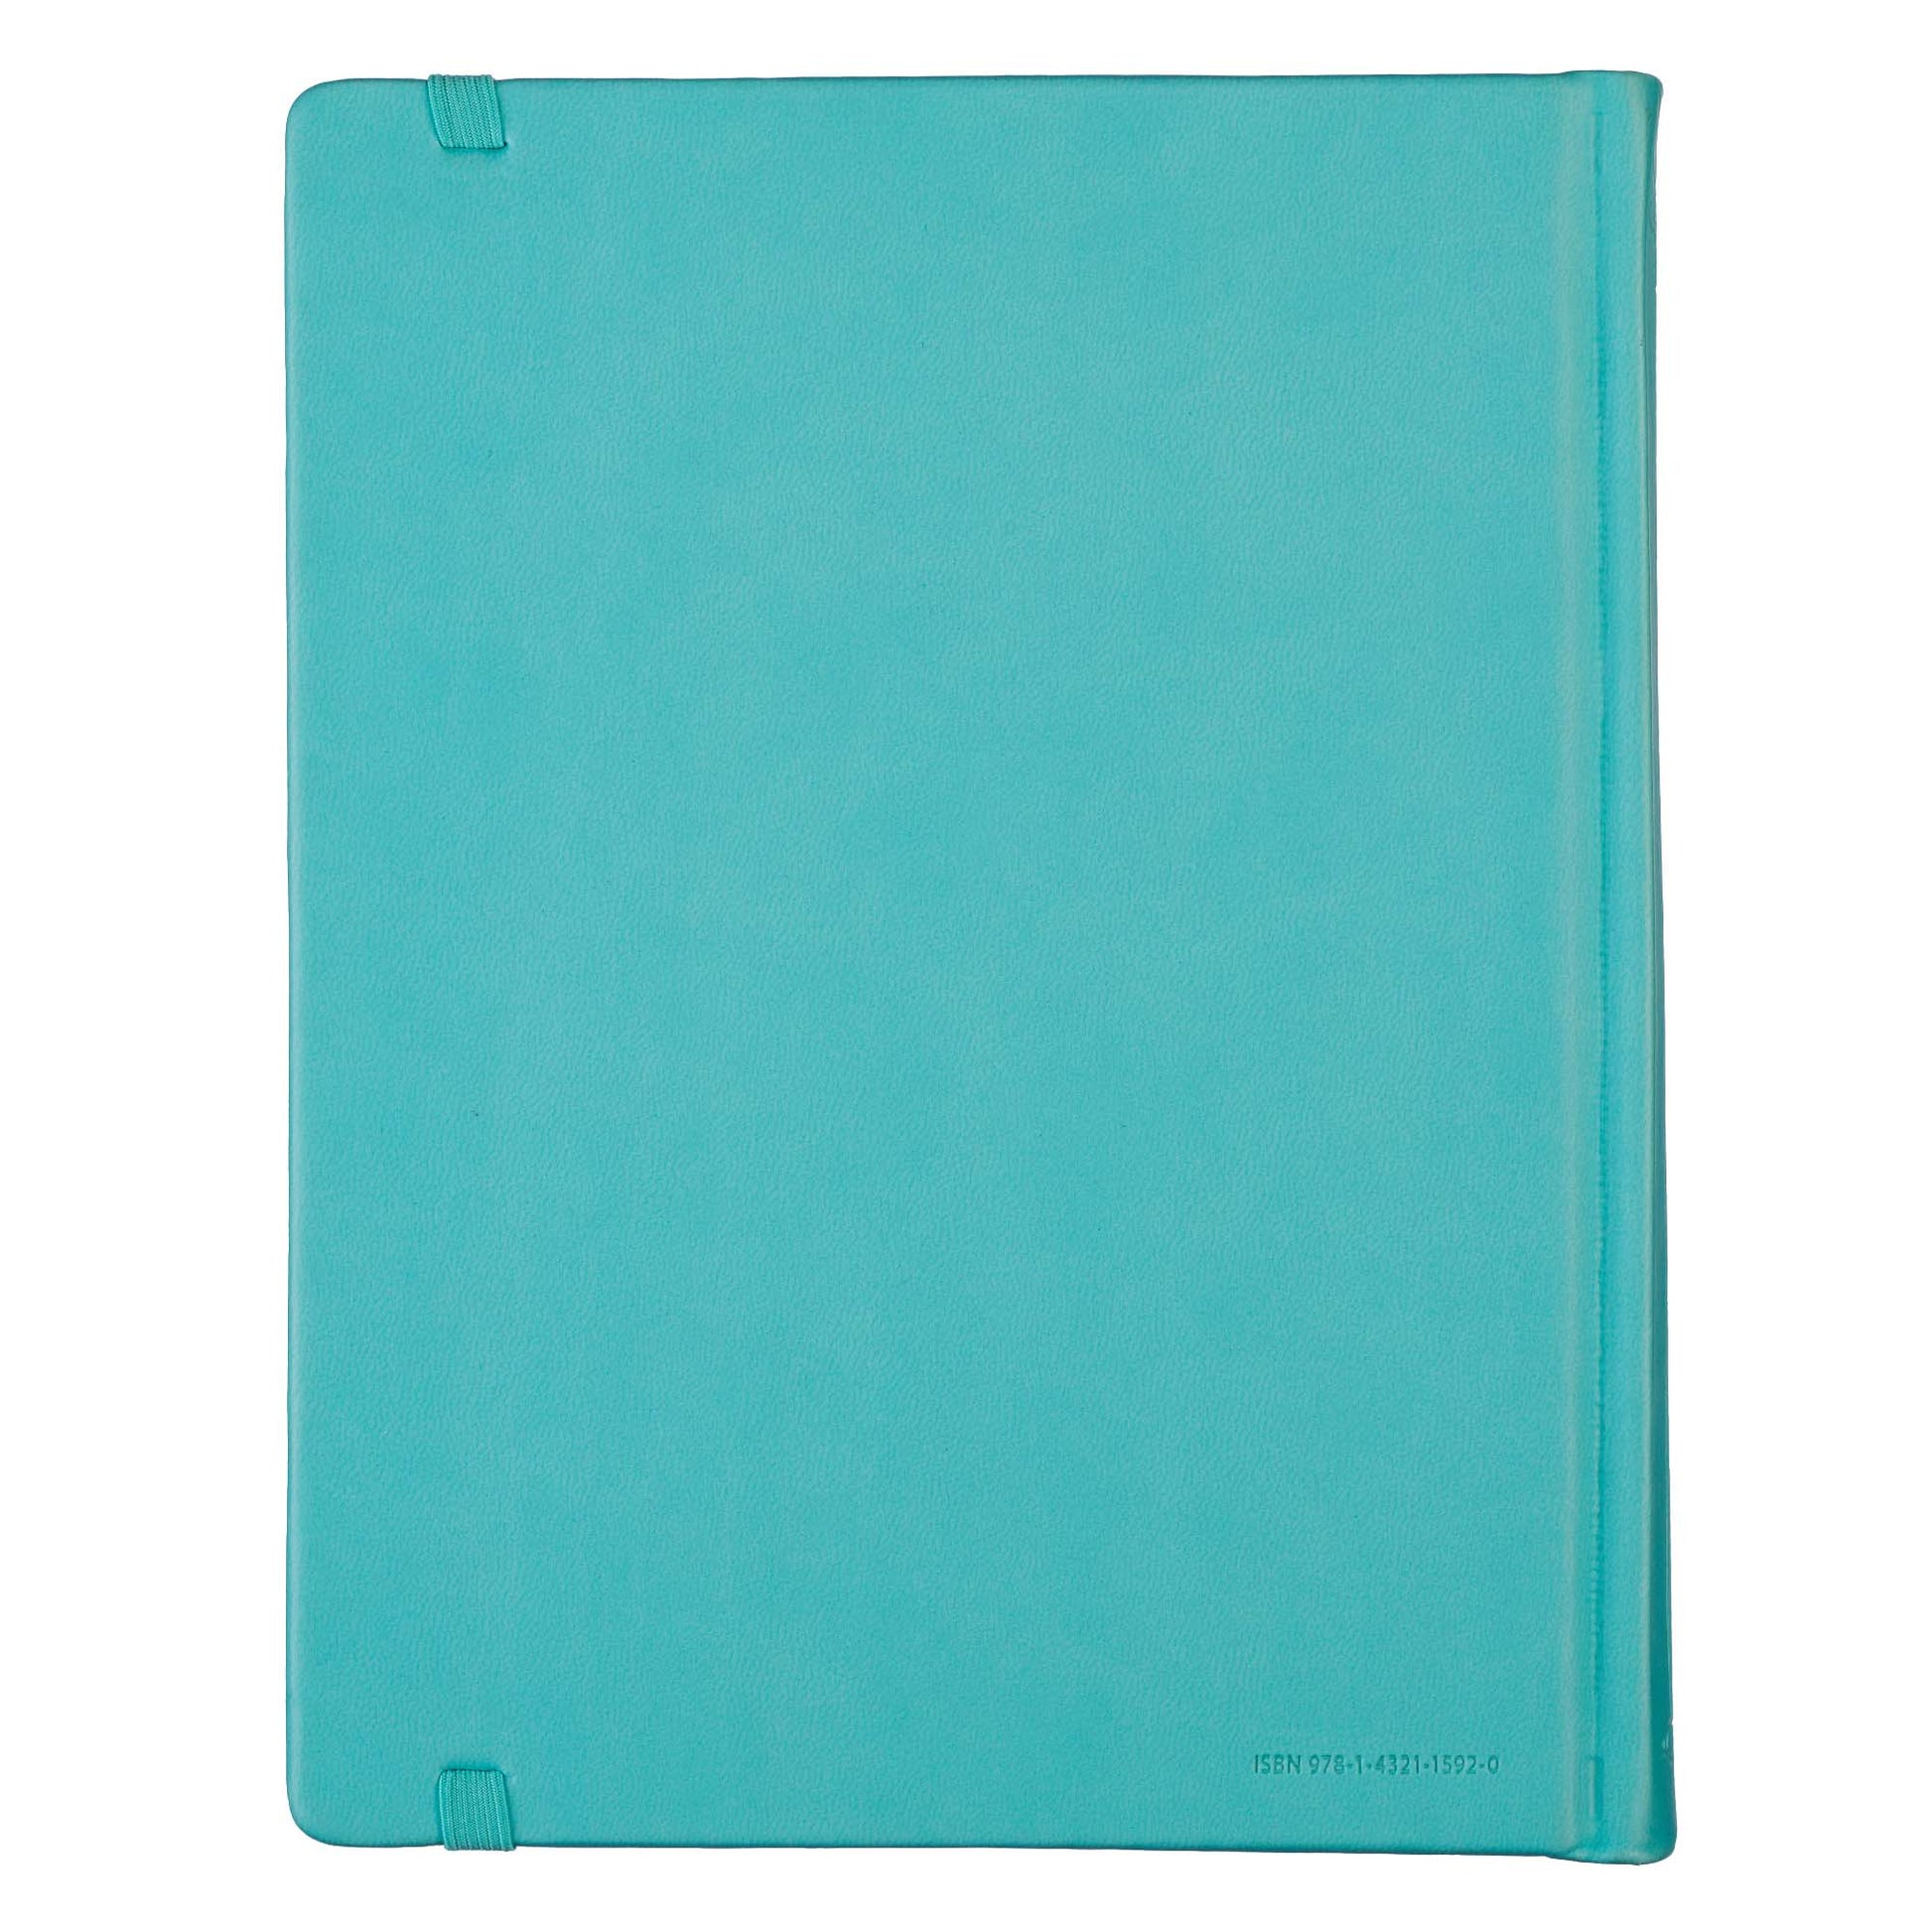 Teal Faux Leather Hardcover KJV My Creative Bible - The Christian Gift Company